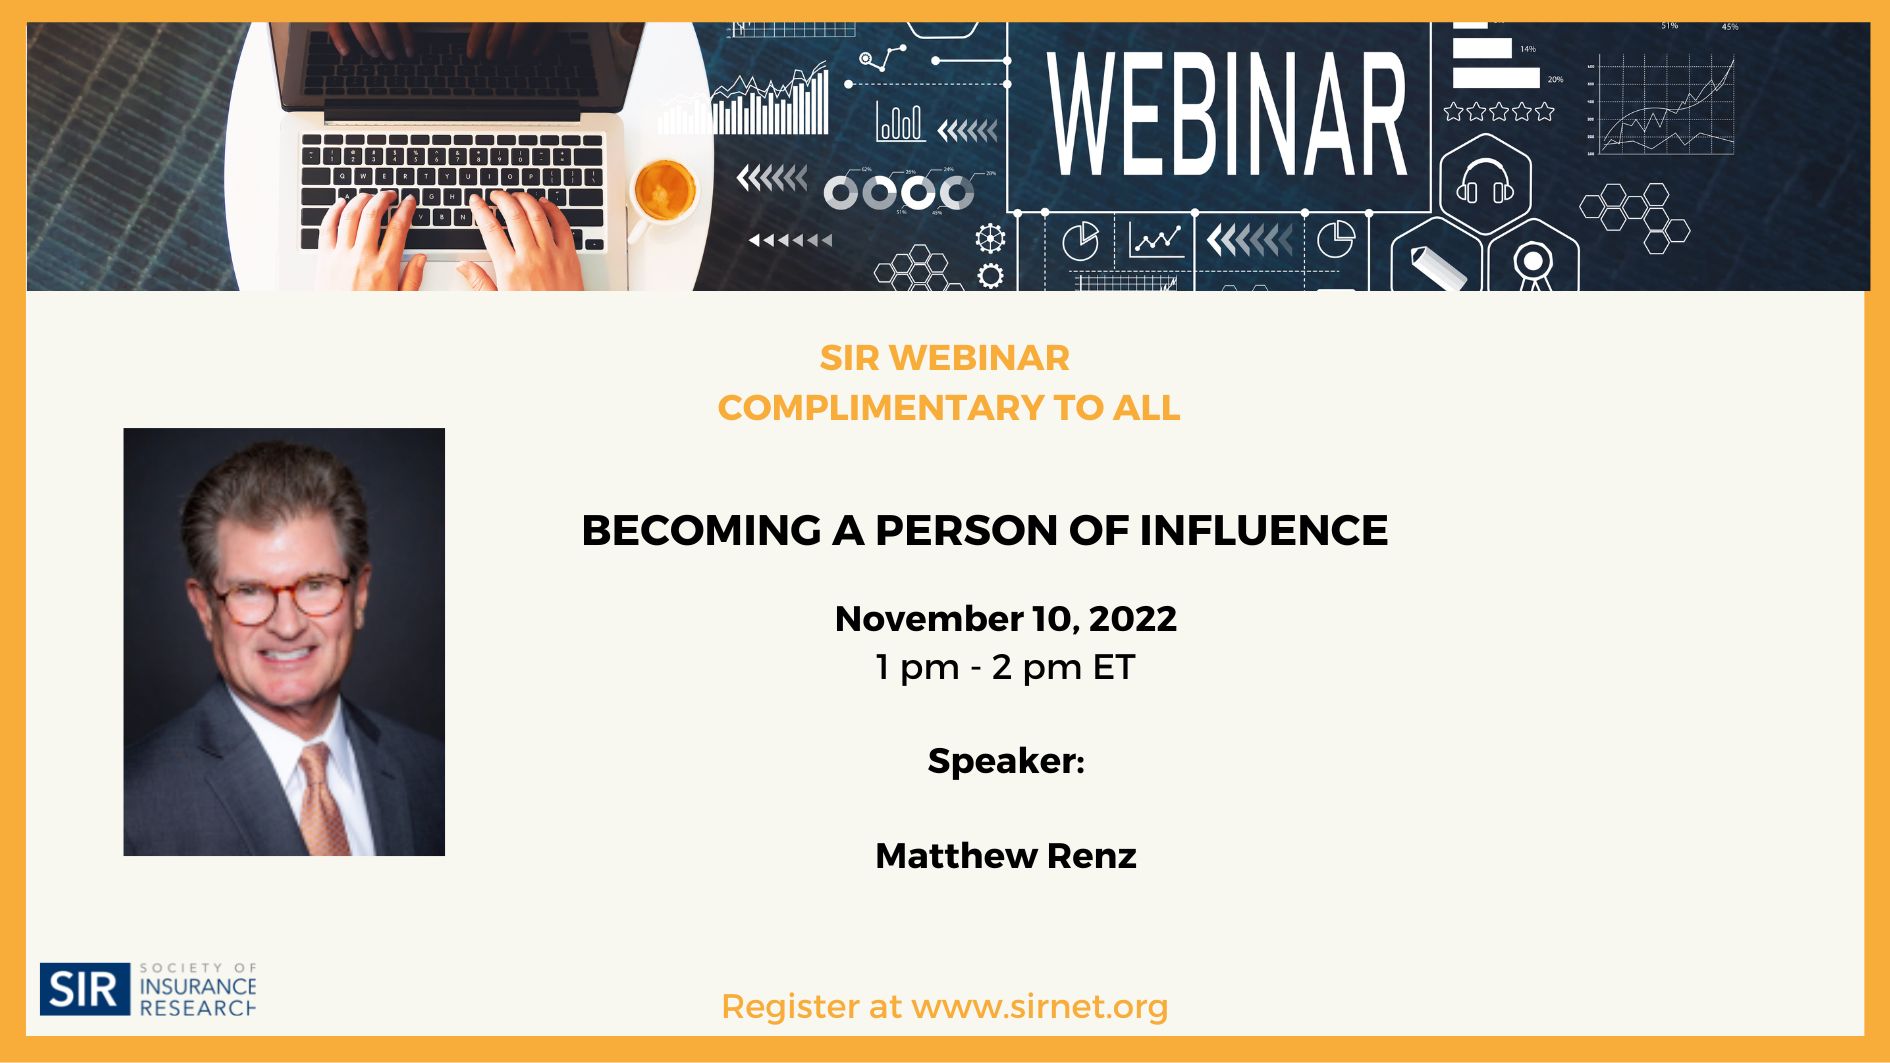 SIR Webinar: Becoming a Person of Influence